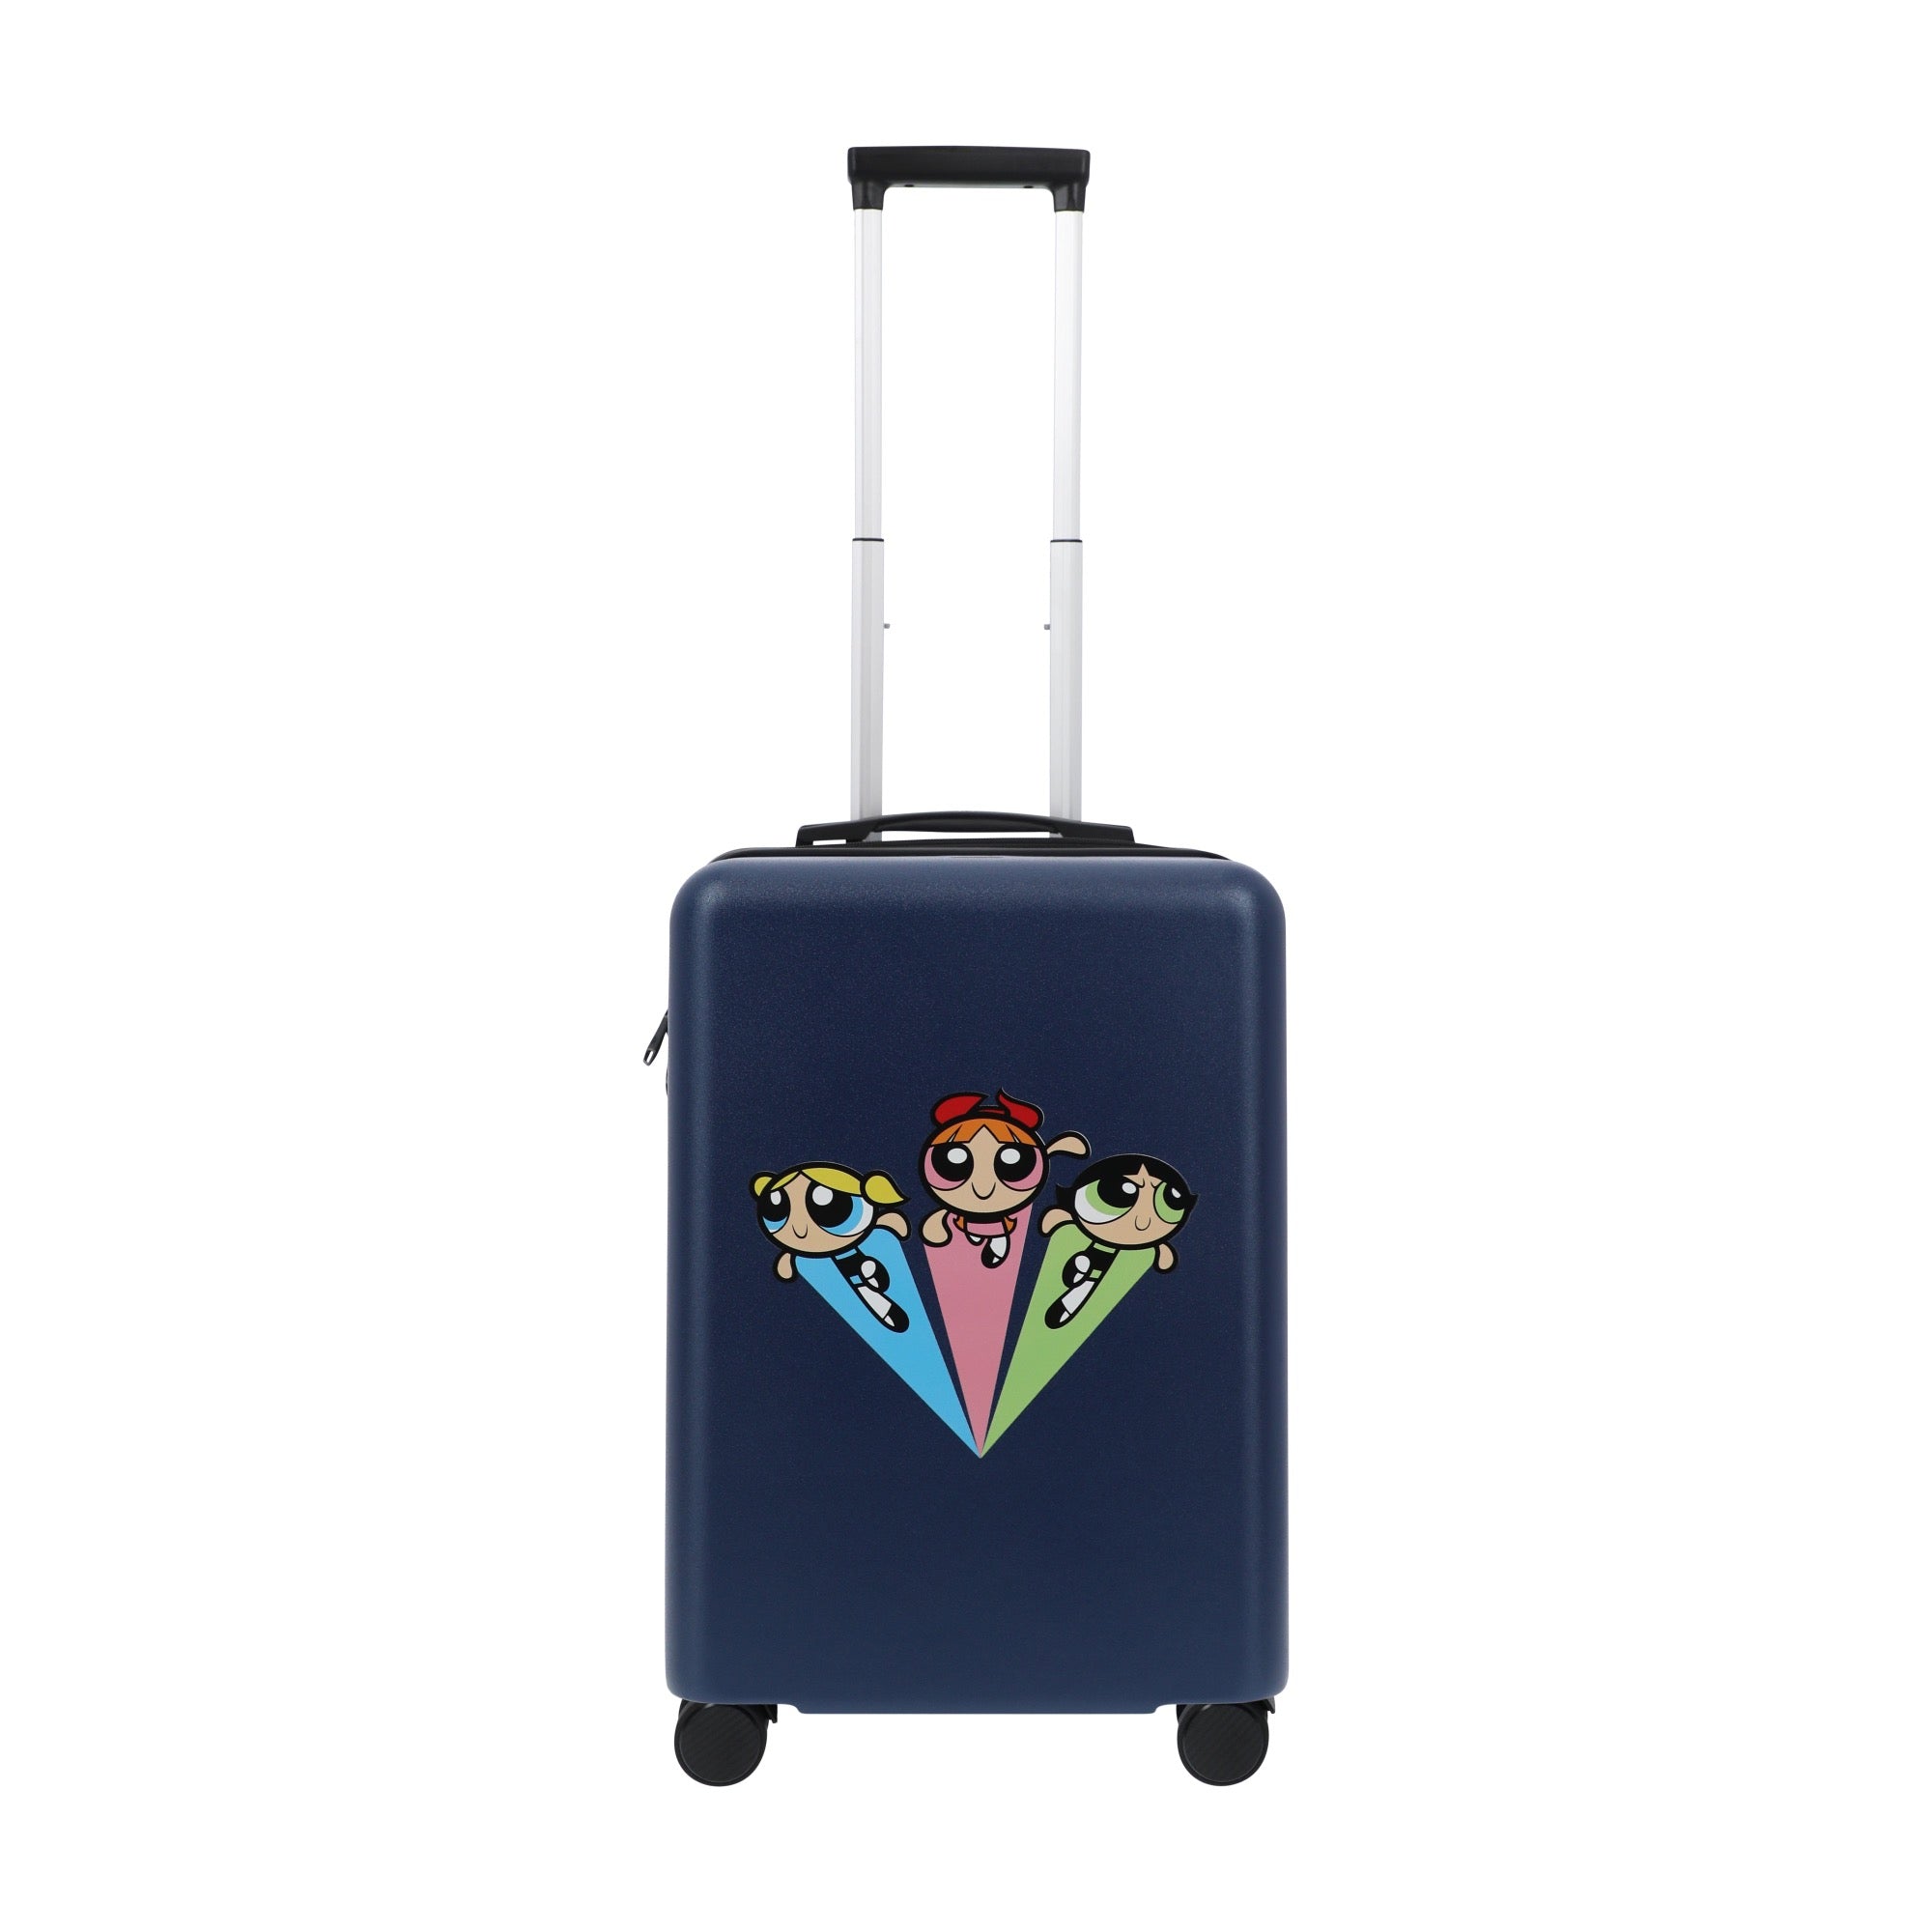 Navy blue WB powerpuff girls 22.5" carry-on spinner suitcase luggage by Ful